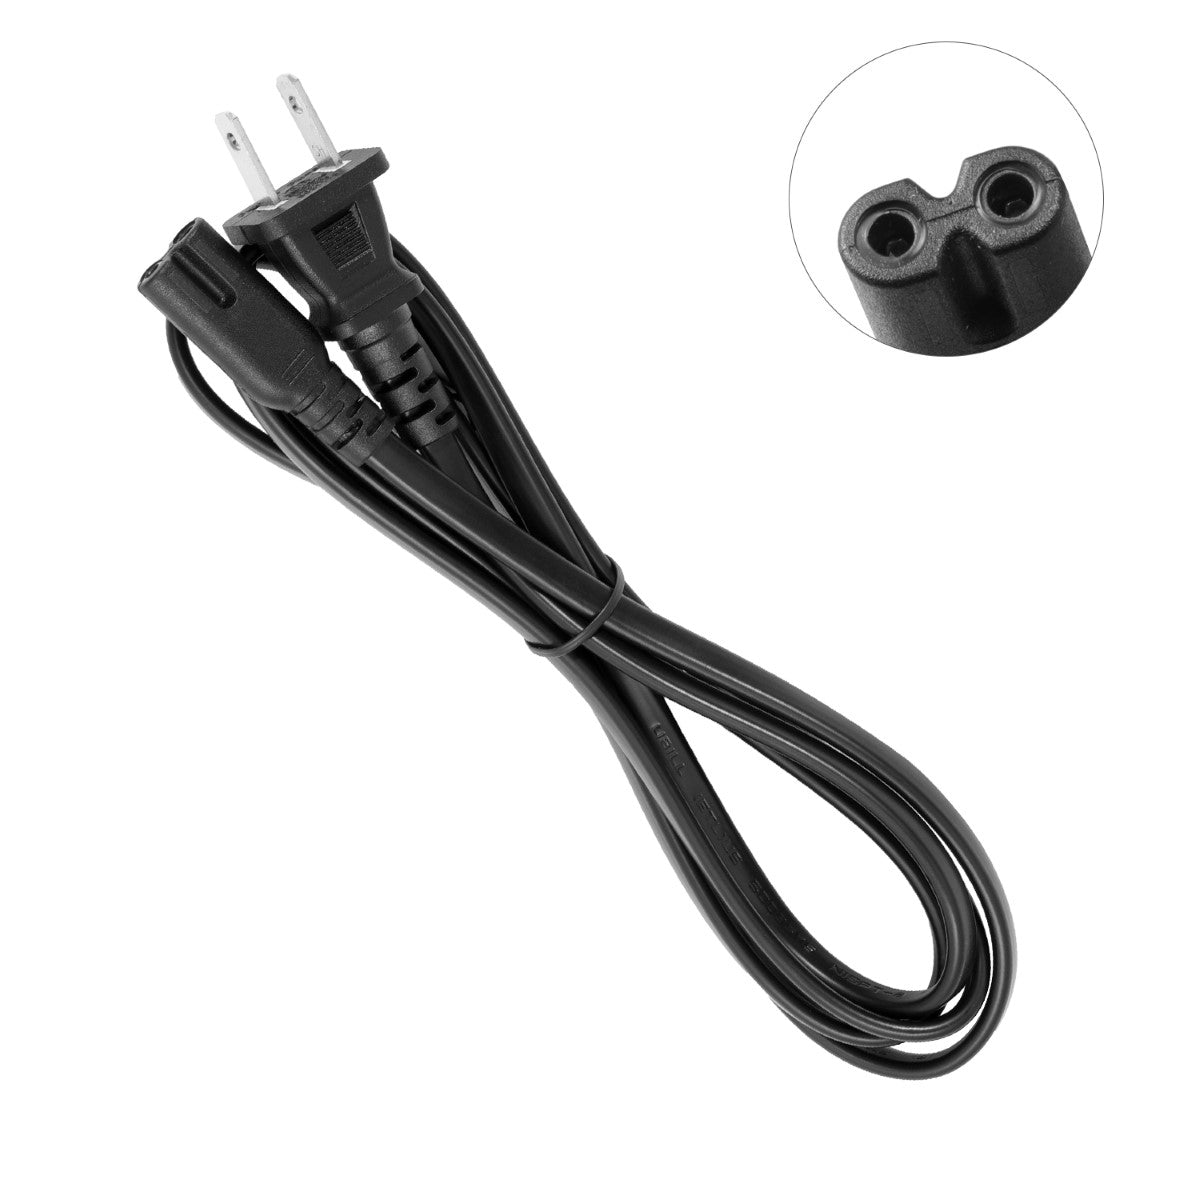 Power Cord for HP ENVY 100 D410 e-All-in-One Printer.